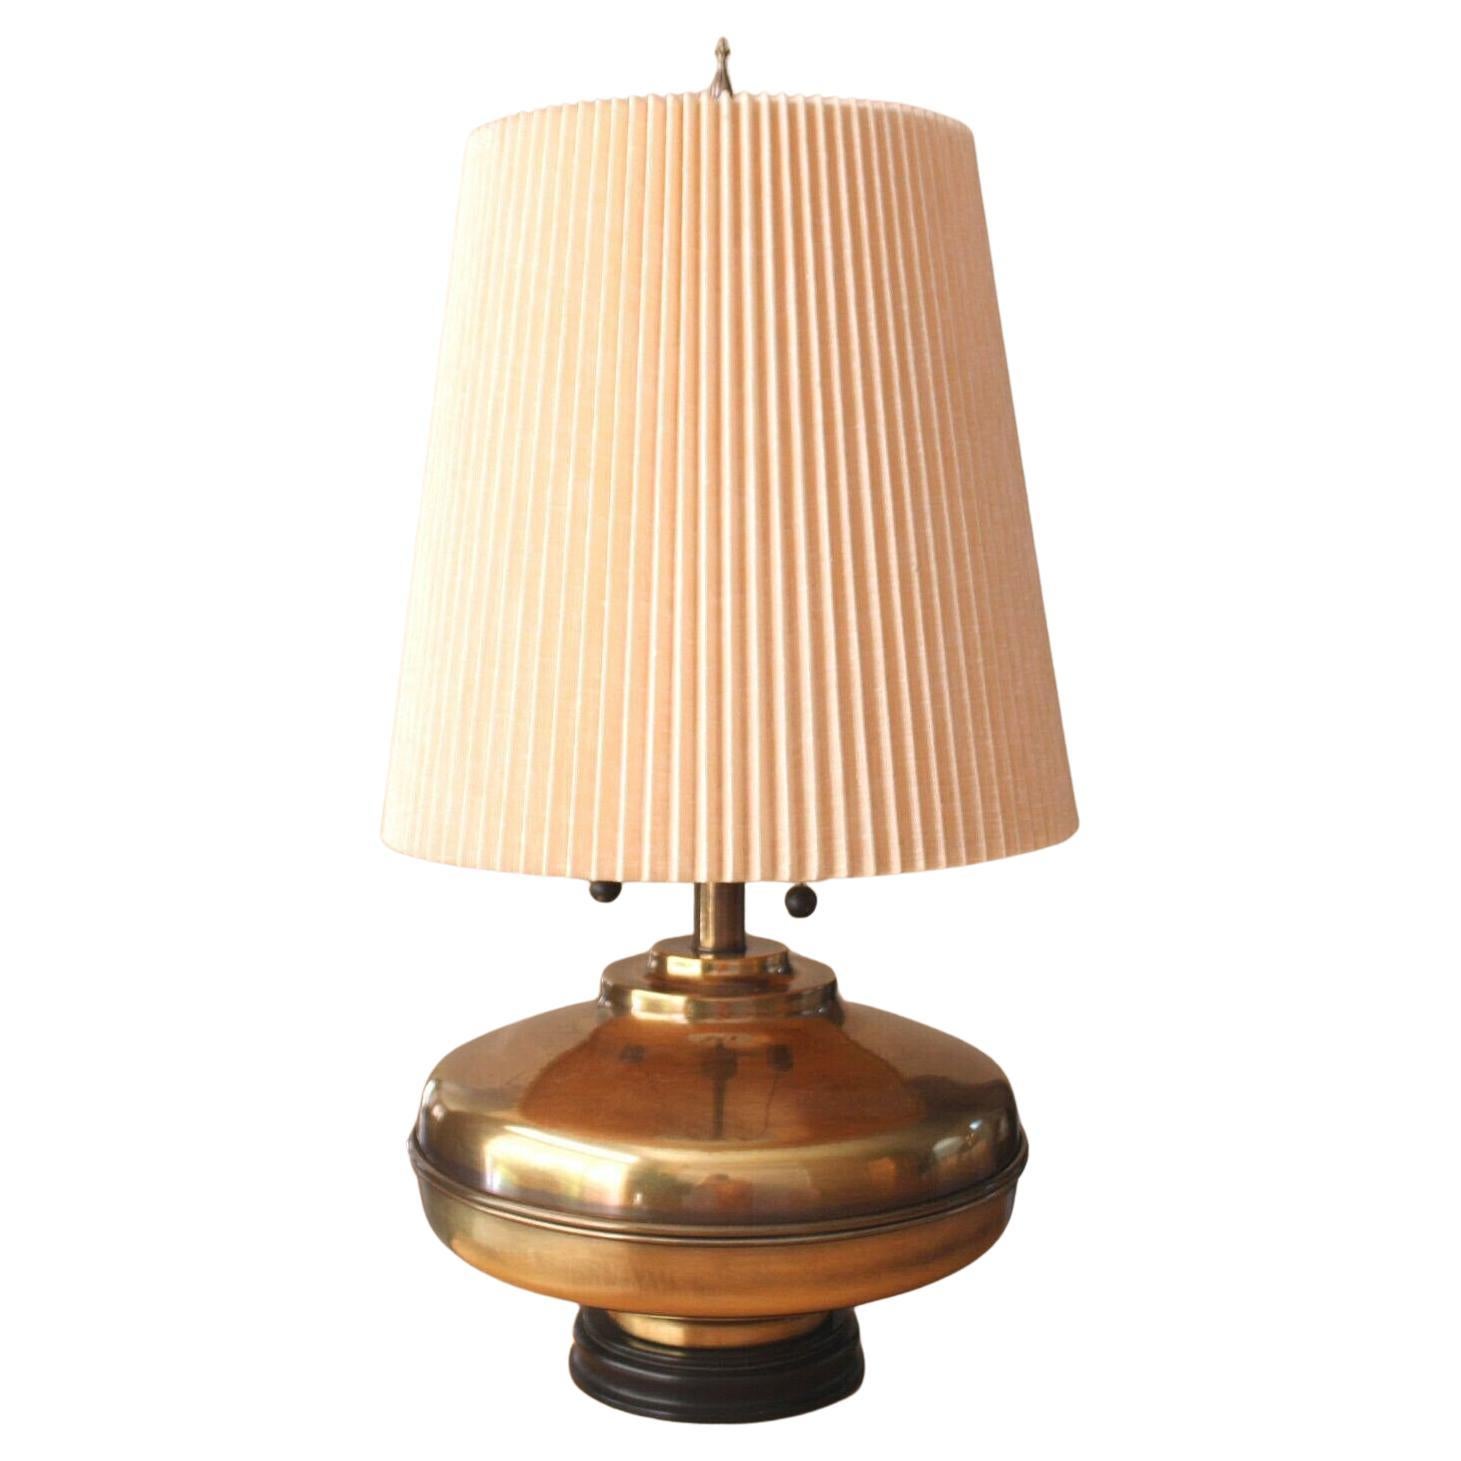 Marvelous MARBRO Mid Century Polished Brass Table Lamp! Huge Showpiece Lighting For Sale